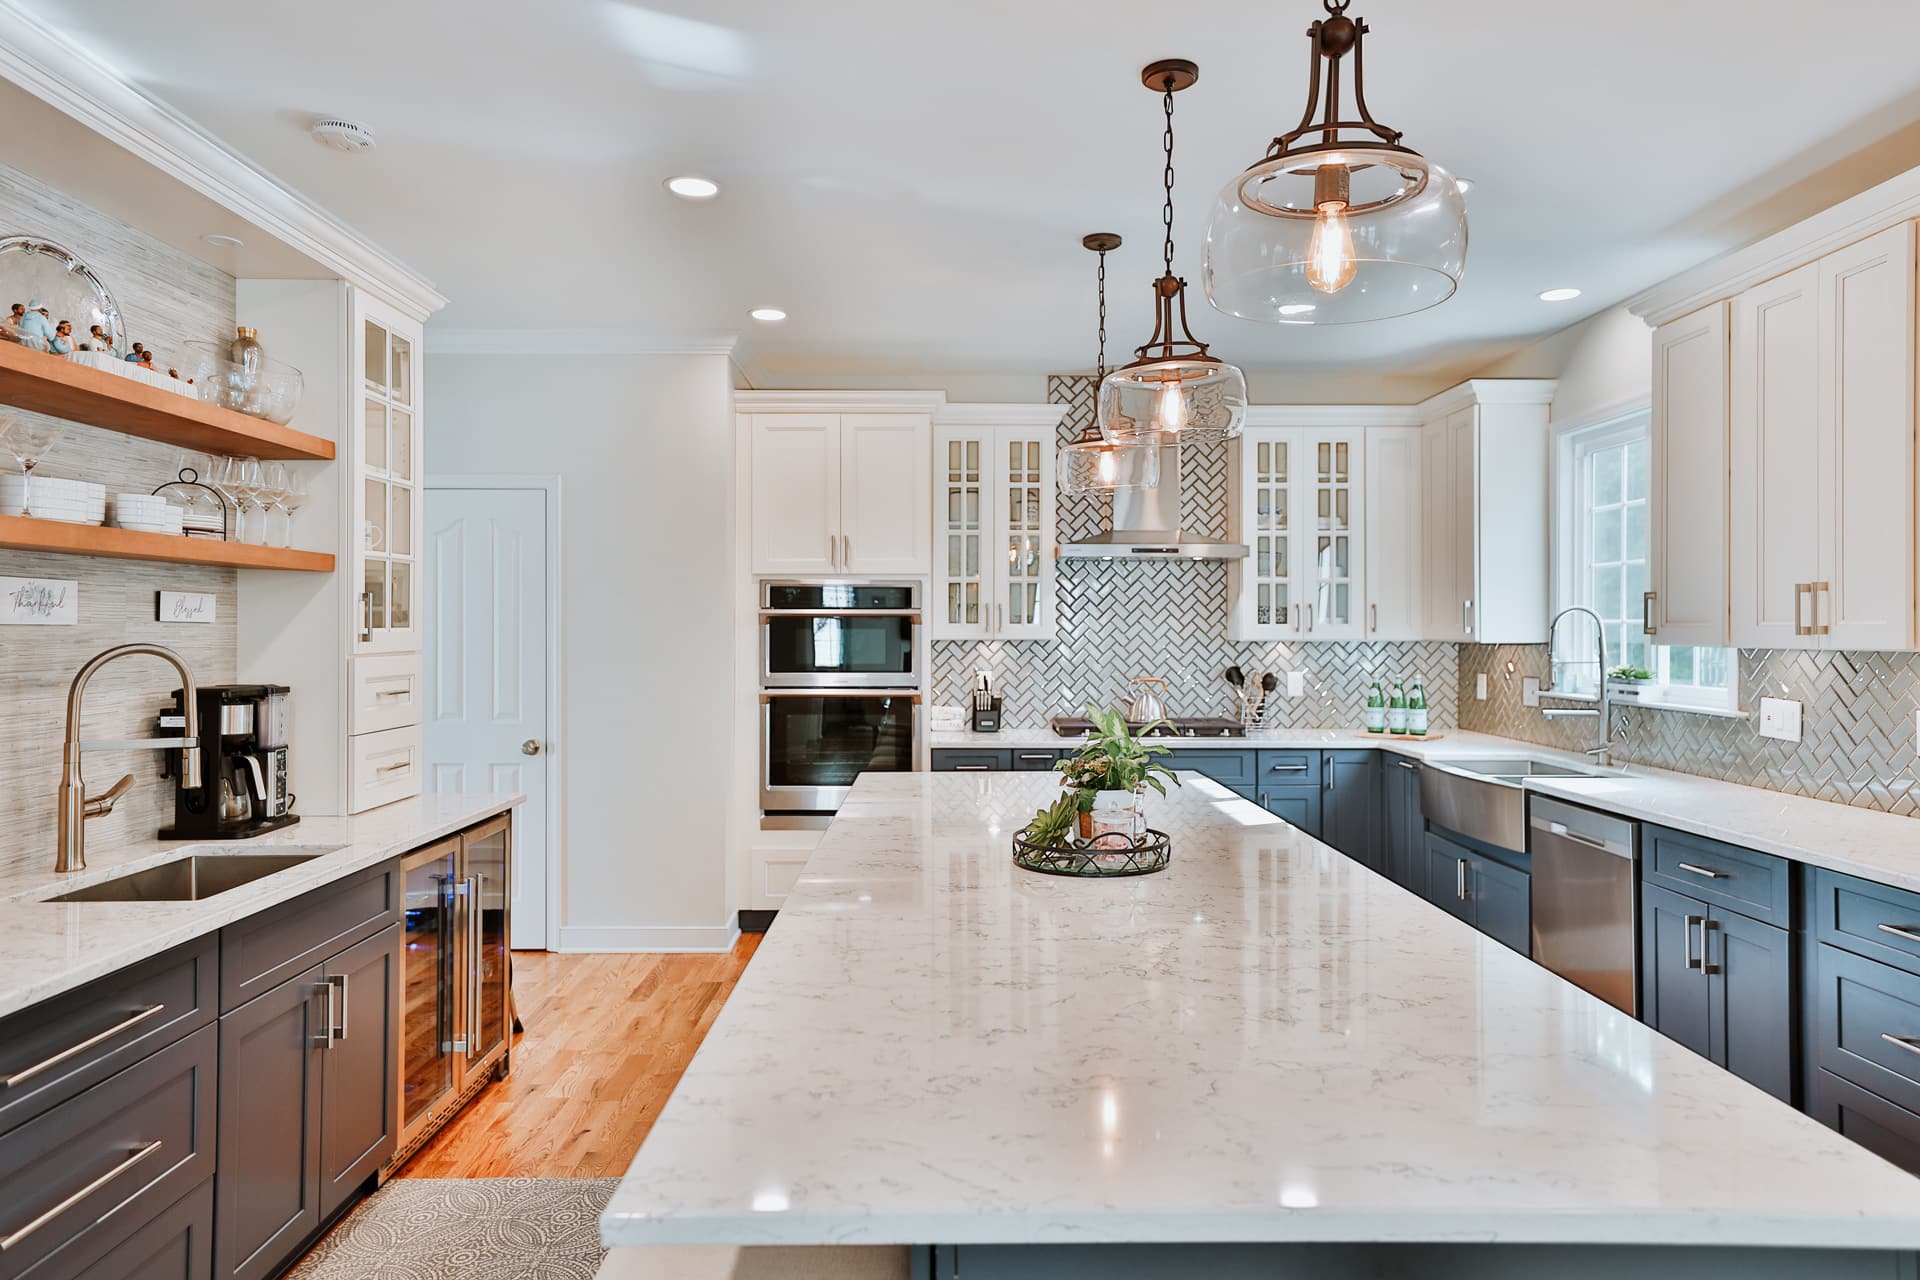 kitchen remodeling cost